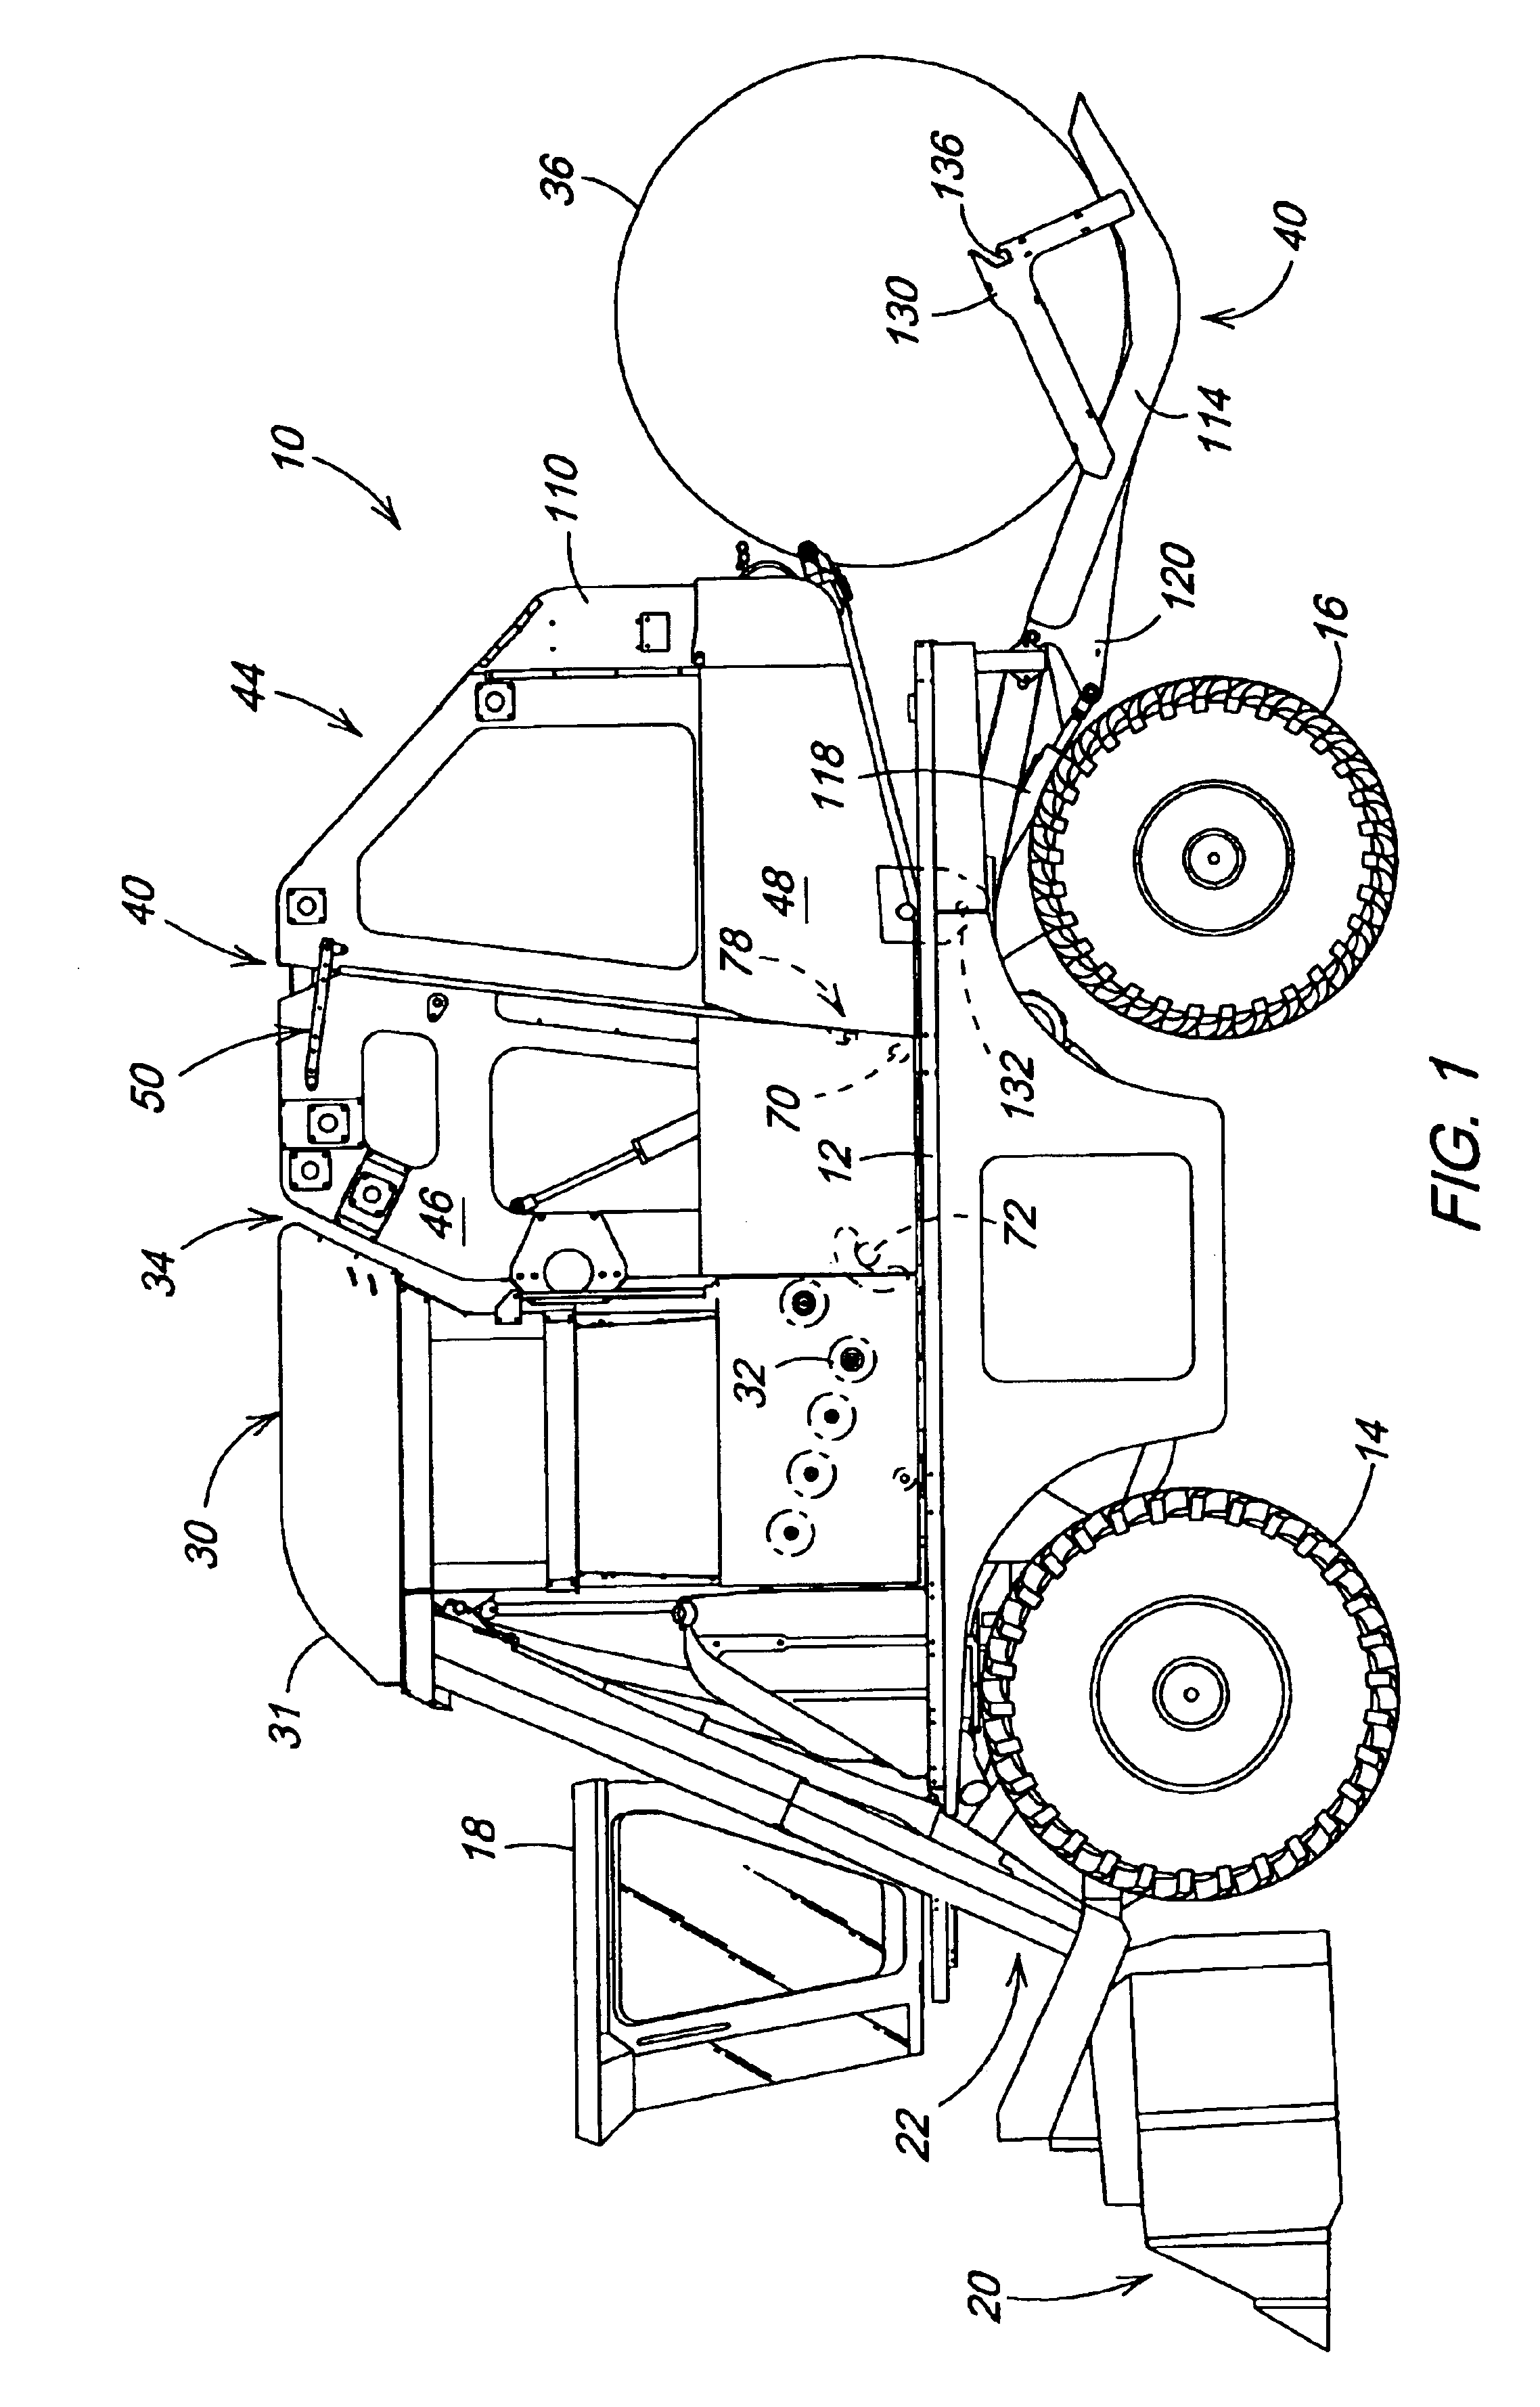 Baler gate linkage and latch structure